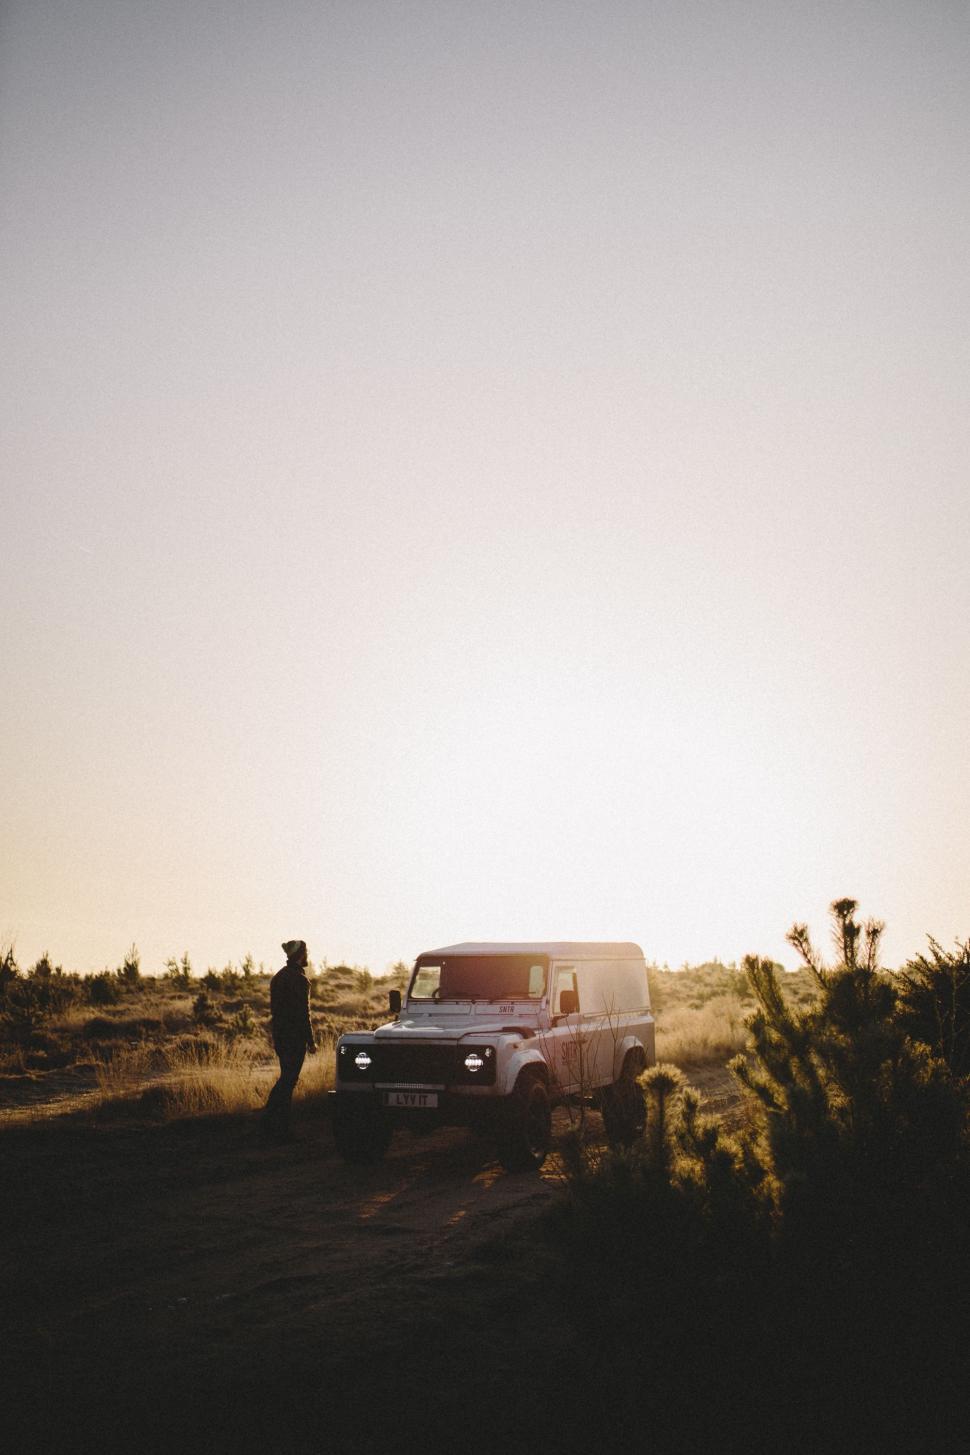 Free Image of Man Standing Next to Truck in Desert 